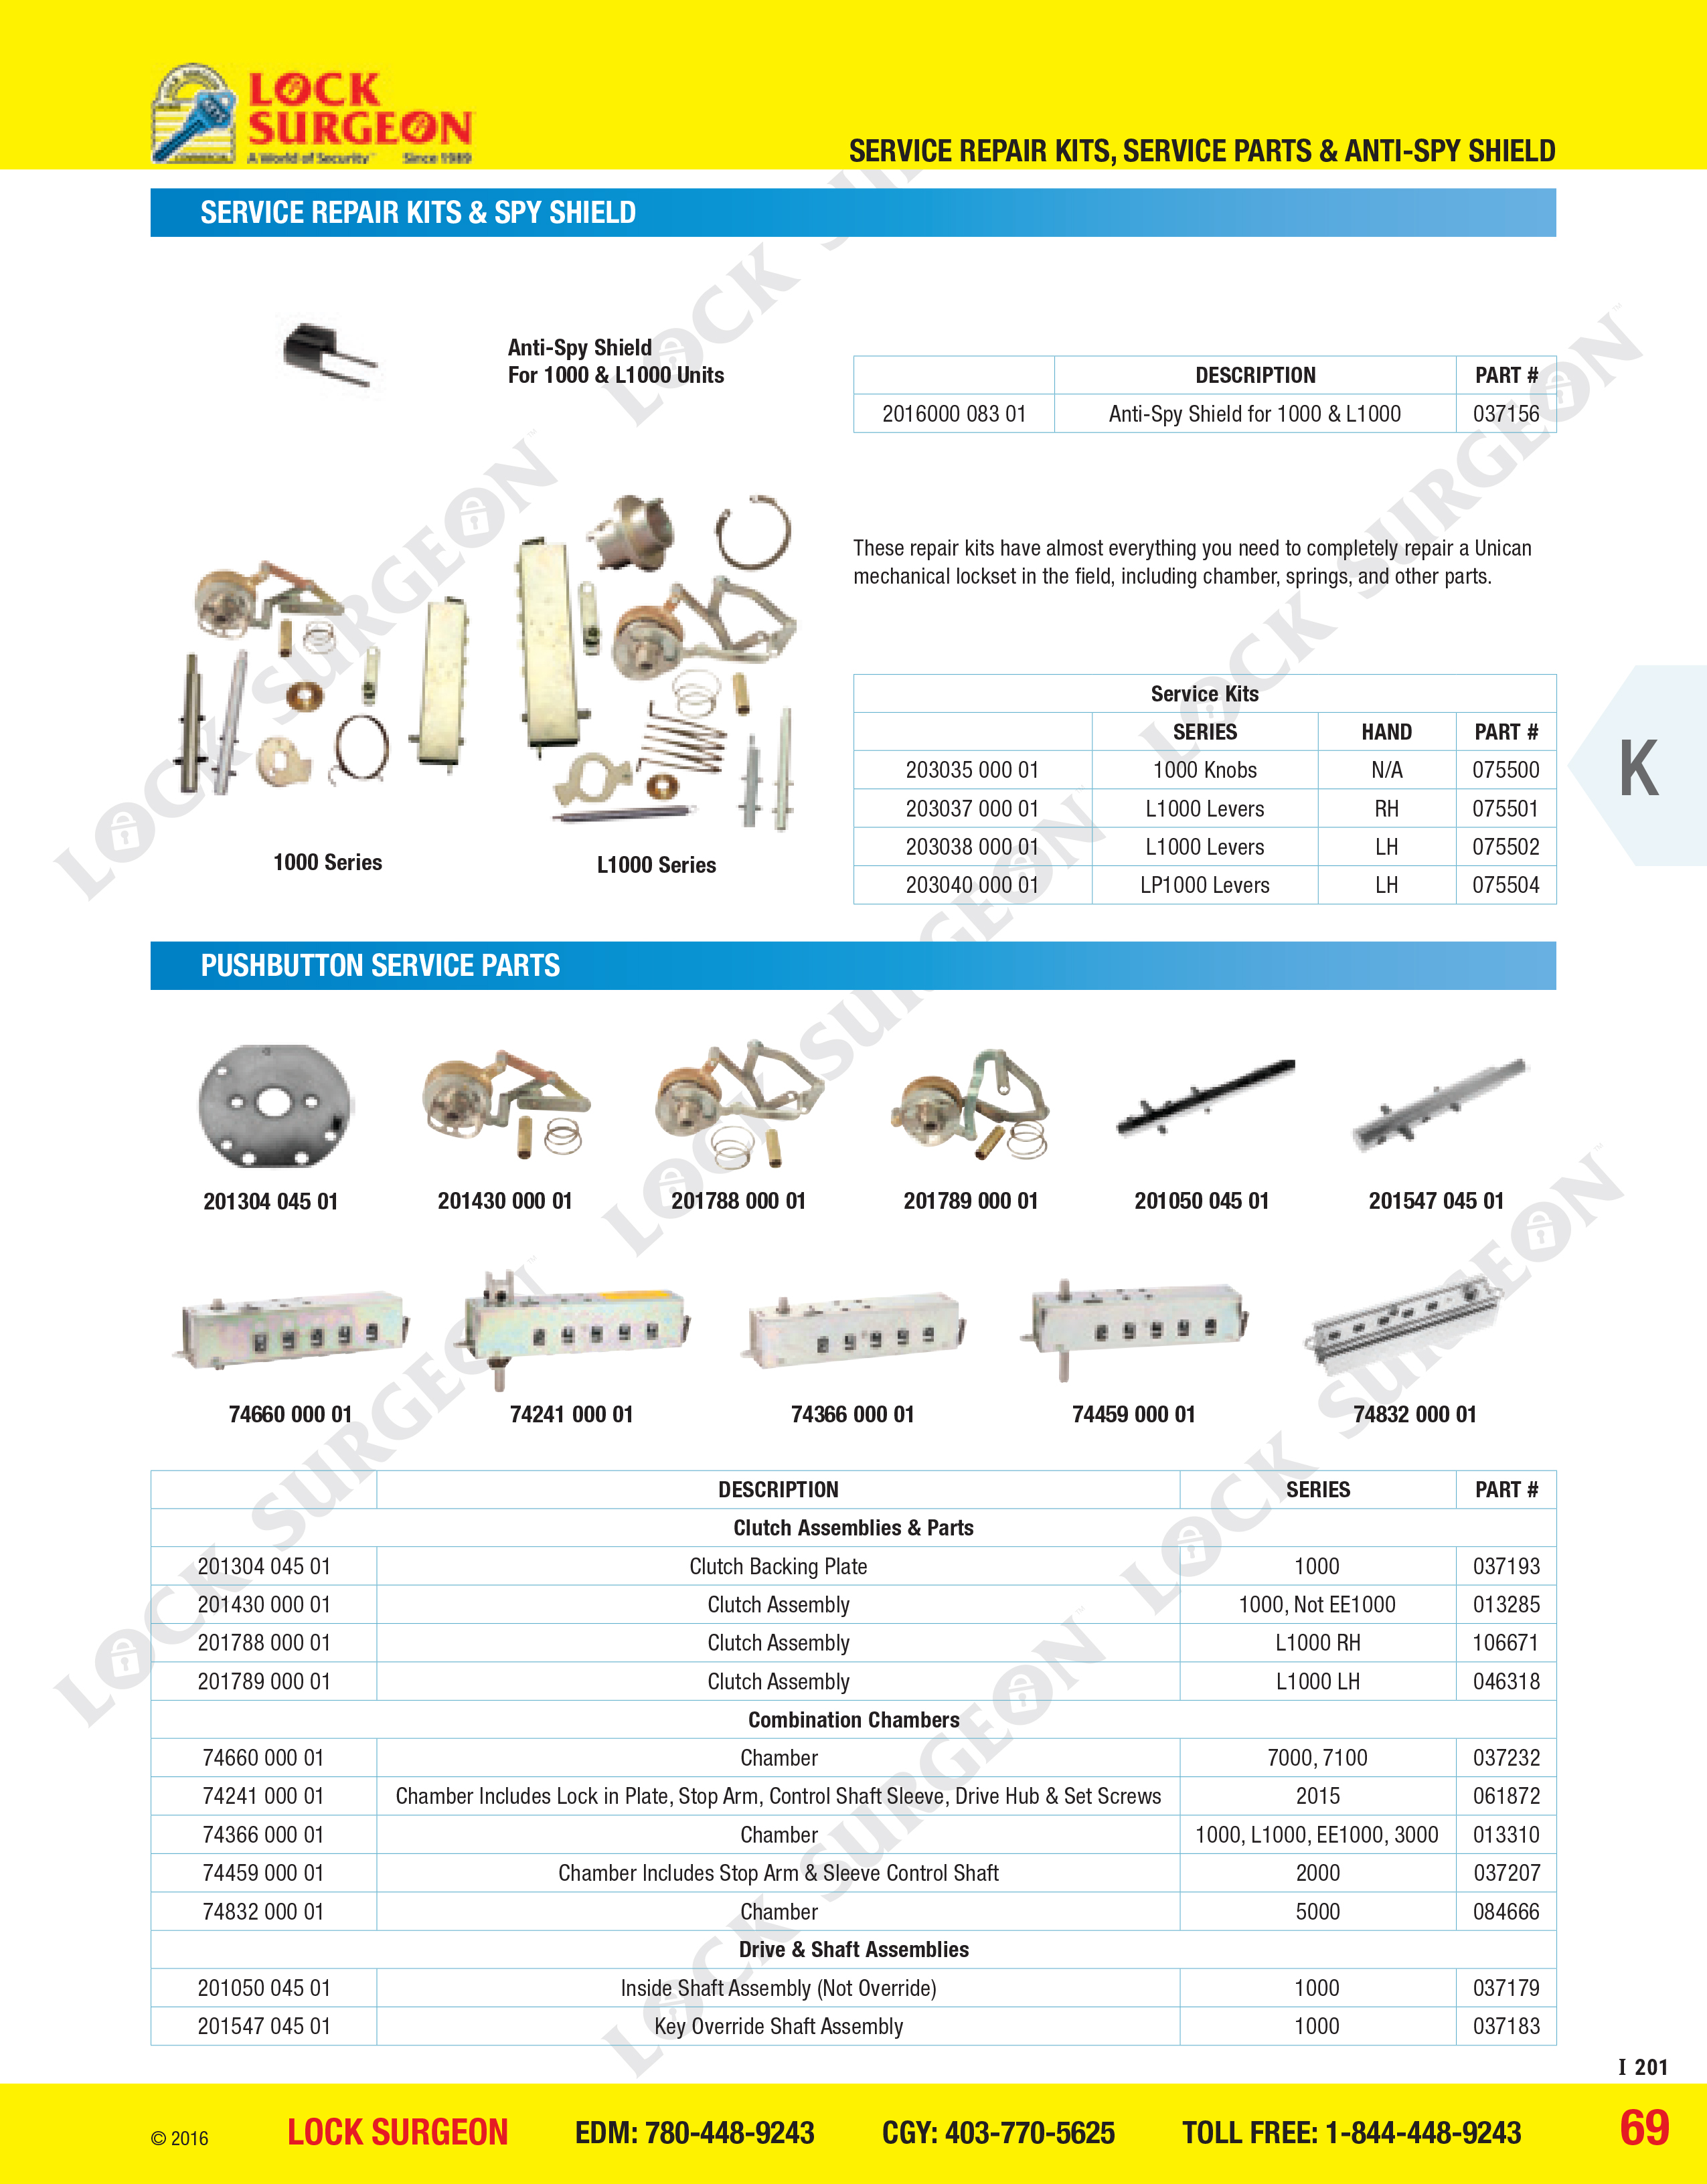 parts for commercial digital entry kaba lock sets, push-button service parts, clutch assemblies, combination chambers, drive and shaft assemblies